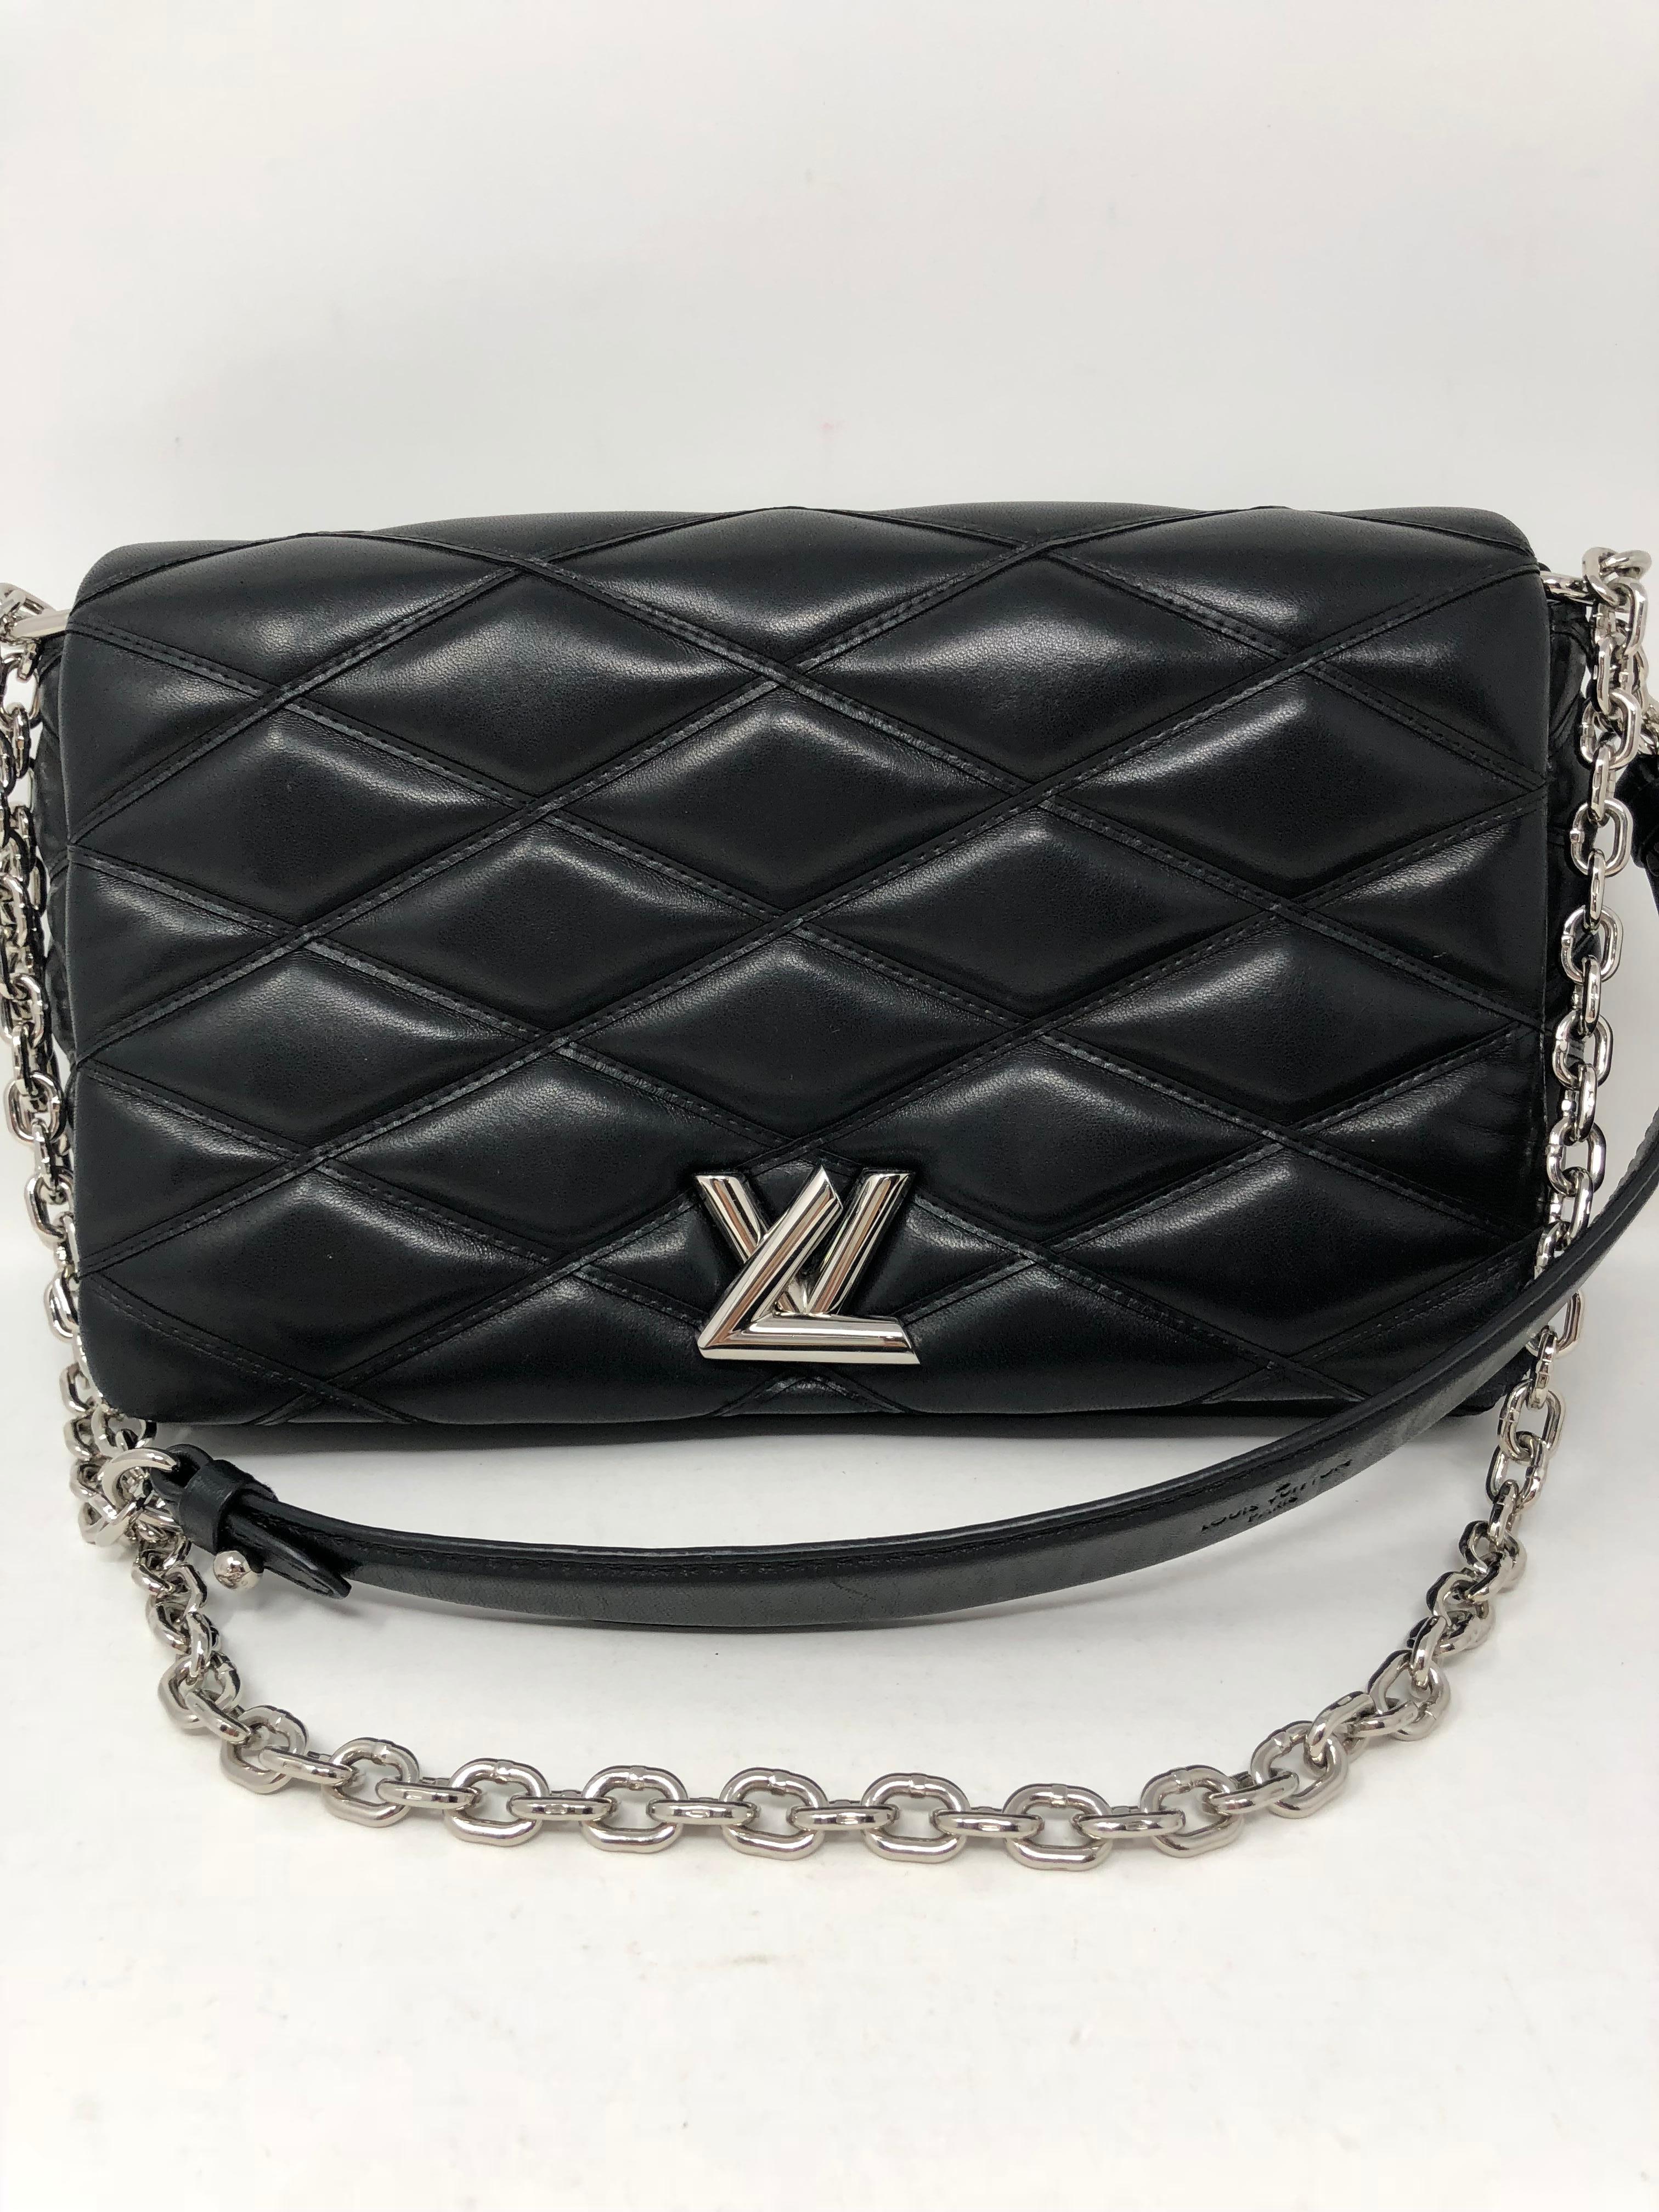 Louis Vuitton Lambskin Malletage GO-14 MM Noir Black Bag. Can be worn as a crossbody or doubled strap shoulder bag. The bag is crafted with soft criss cross embossed leather with a silver sliding chain link shoulder strap. Soft lambskin leather. The